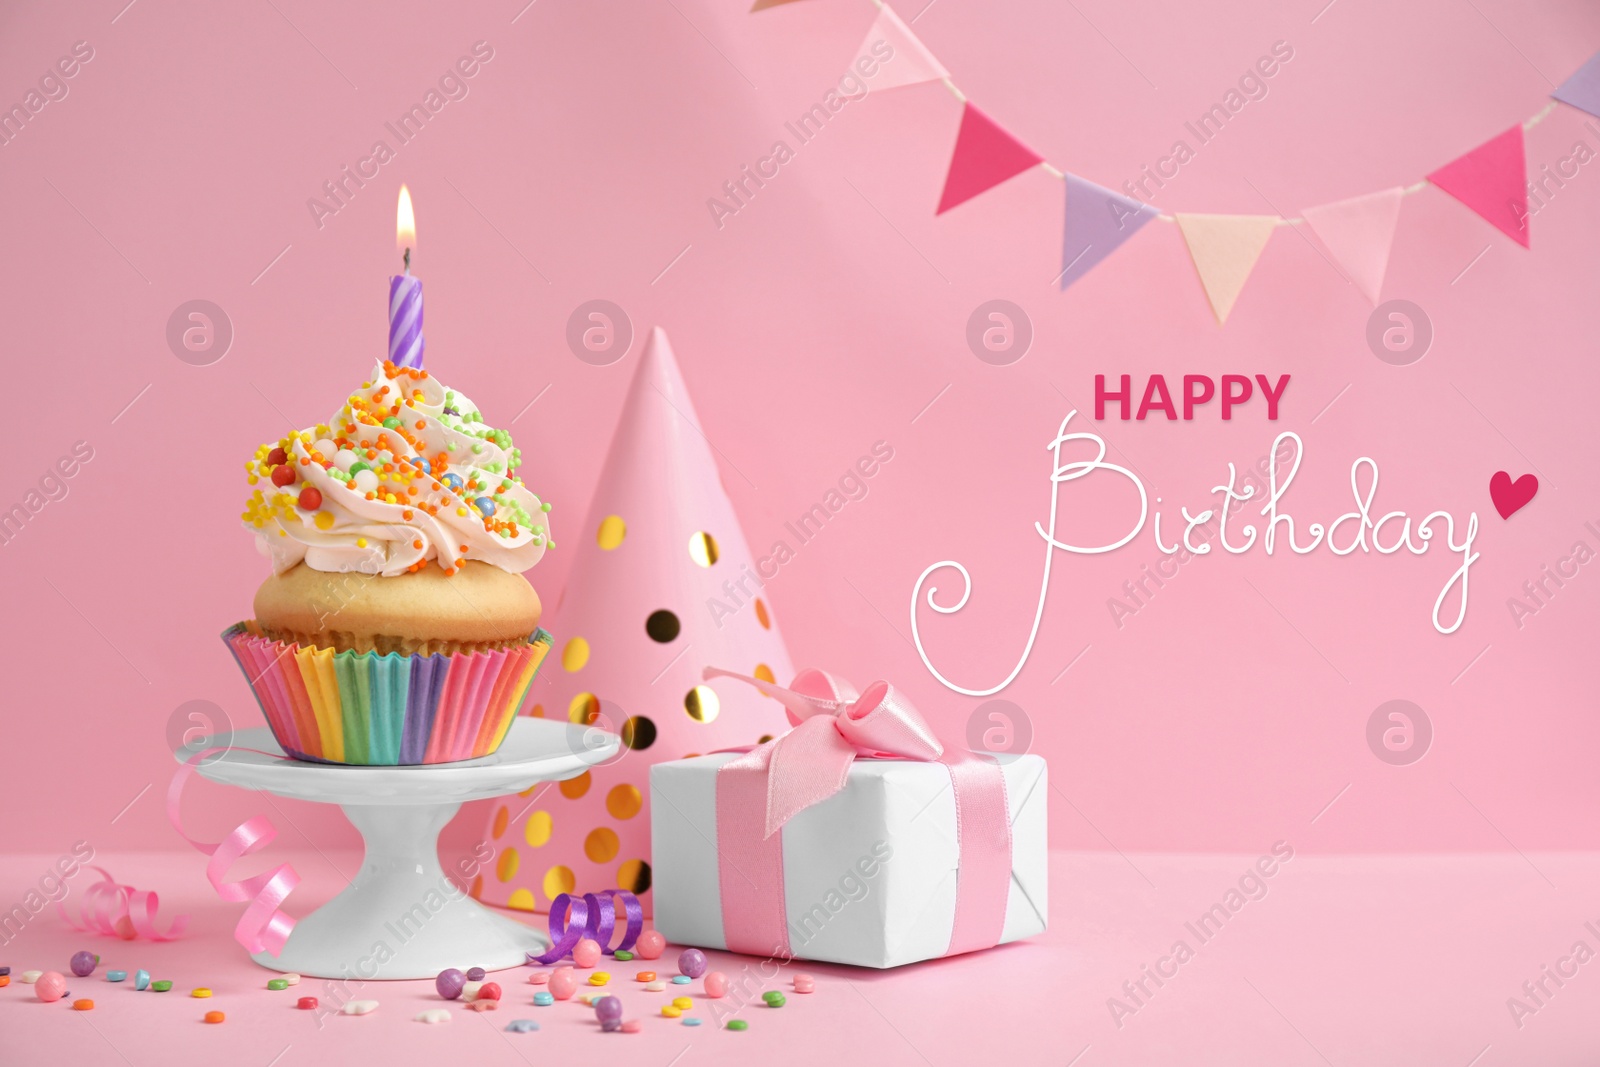 Image of Happy Birthday! Composition with delicious cupcake on pink background